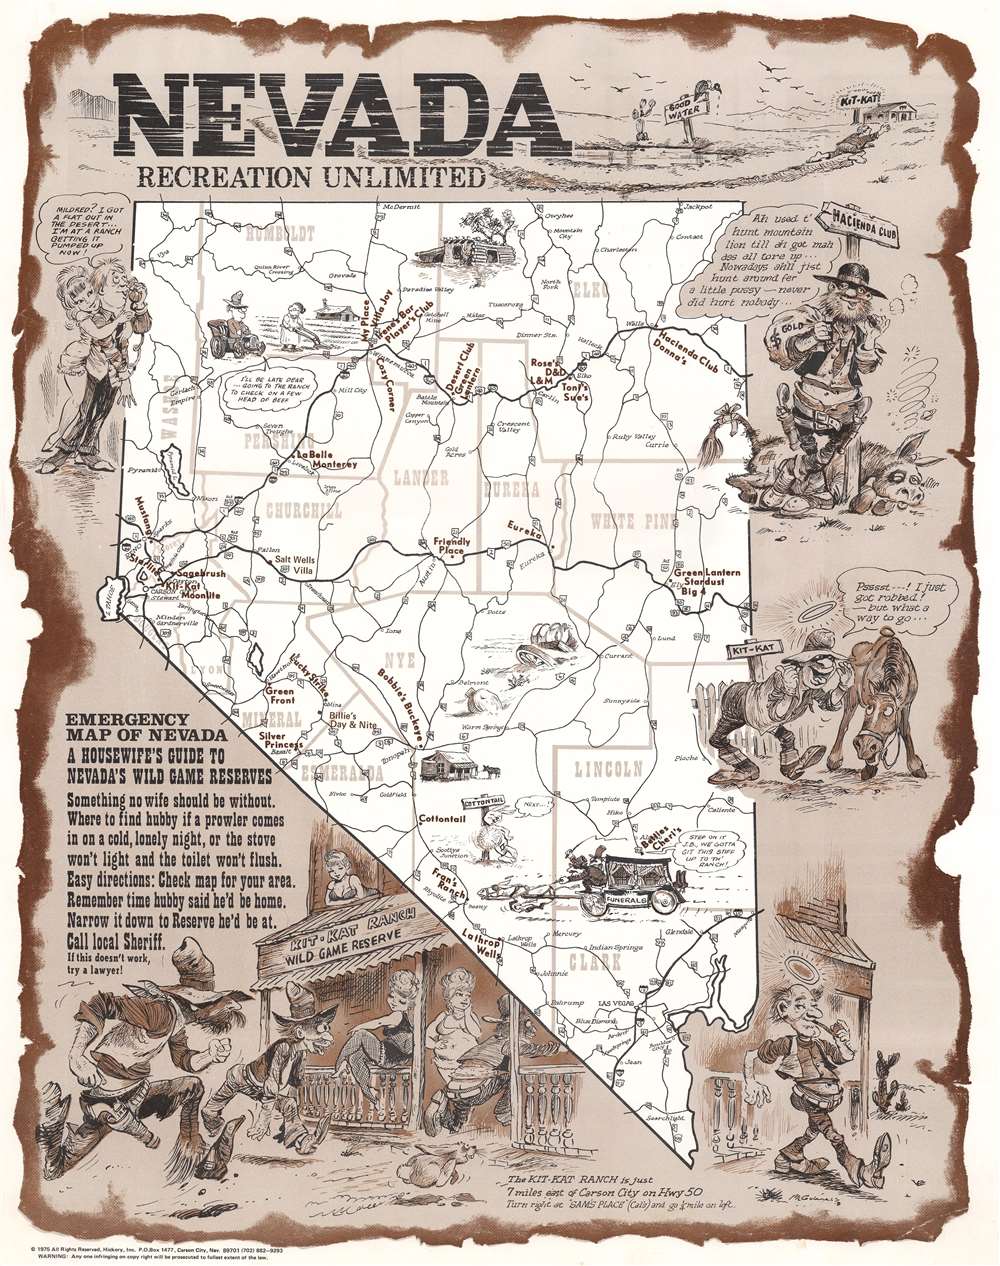 Nevada Recreation Unlimited. Emergency Map of Nevada. A Housewife's Guide to Nevada's Wild Game Reserves. - Main View